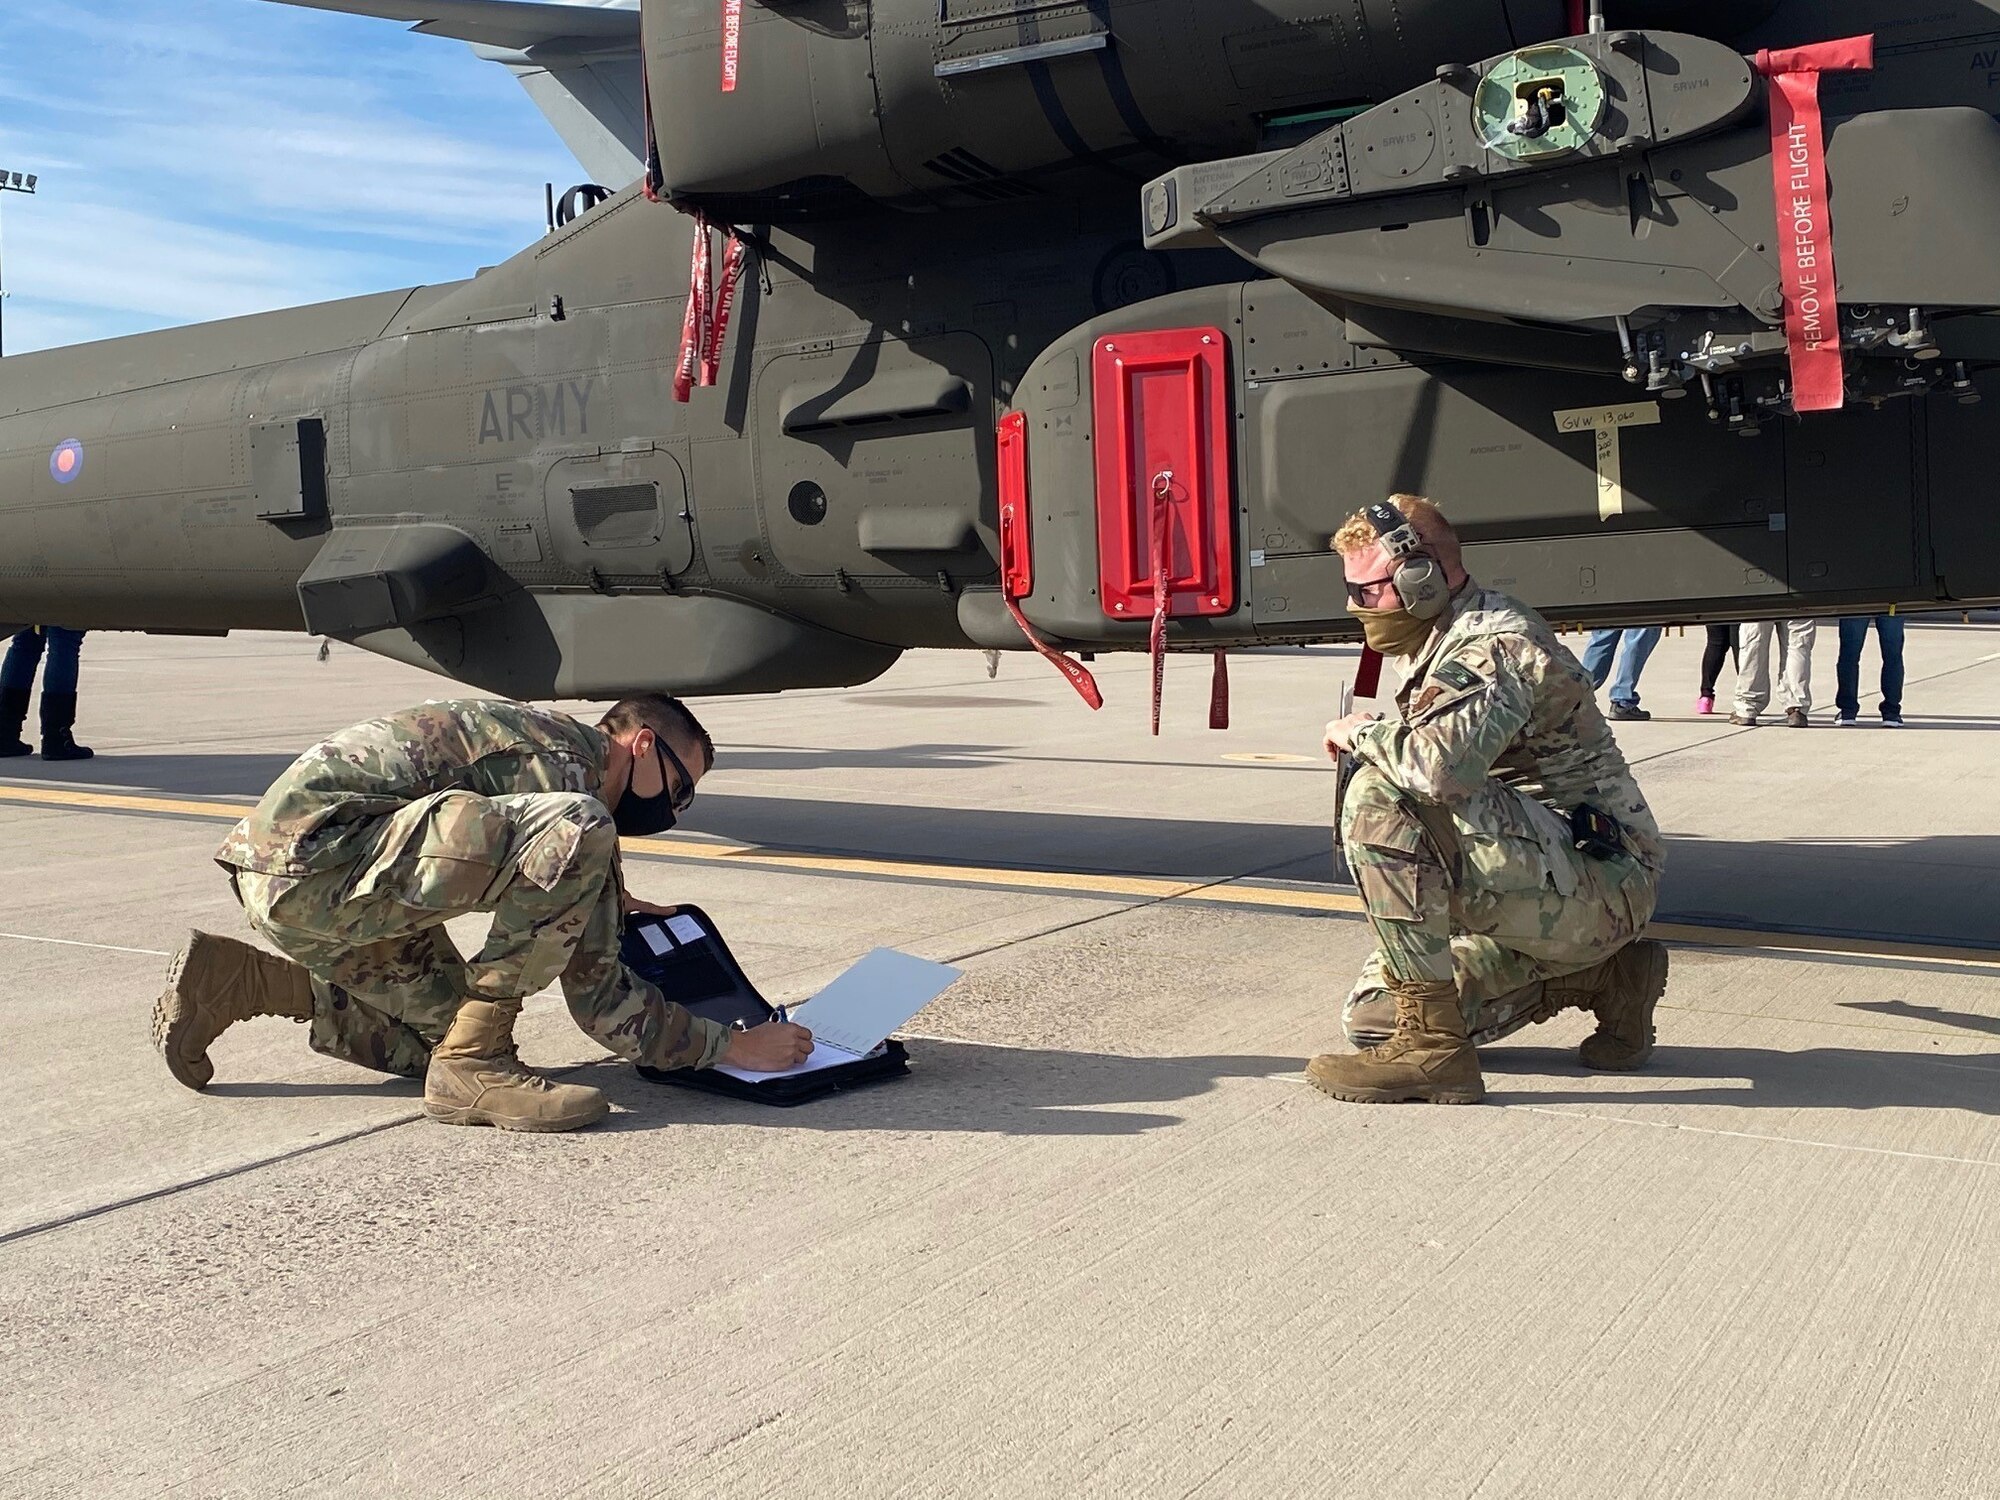 Staff Sgt. Chaz Bruno and Staff Sgt. Joe Franzen, air cargo specialists with the 161st Logistics Readiness Squadron, conduct a preflight inspection of an AH-64 Apache helicopter at the Goldwater Air National Guard Base in Phoenix, Arizona, Jan. 21, 2021. The 161st was contacted by the U.S. Army’s Apache foreign military sales program office to help load the attack helicopters on C-17 aircraft for shipment to the United Kingdom.